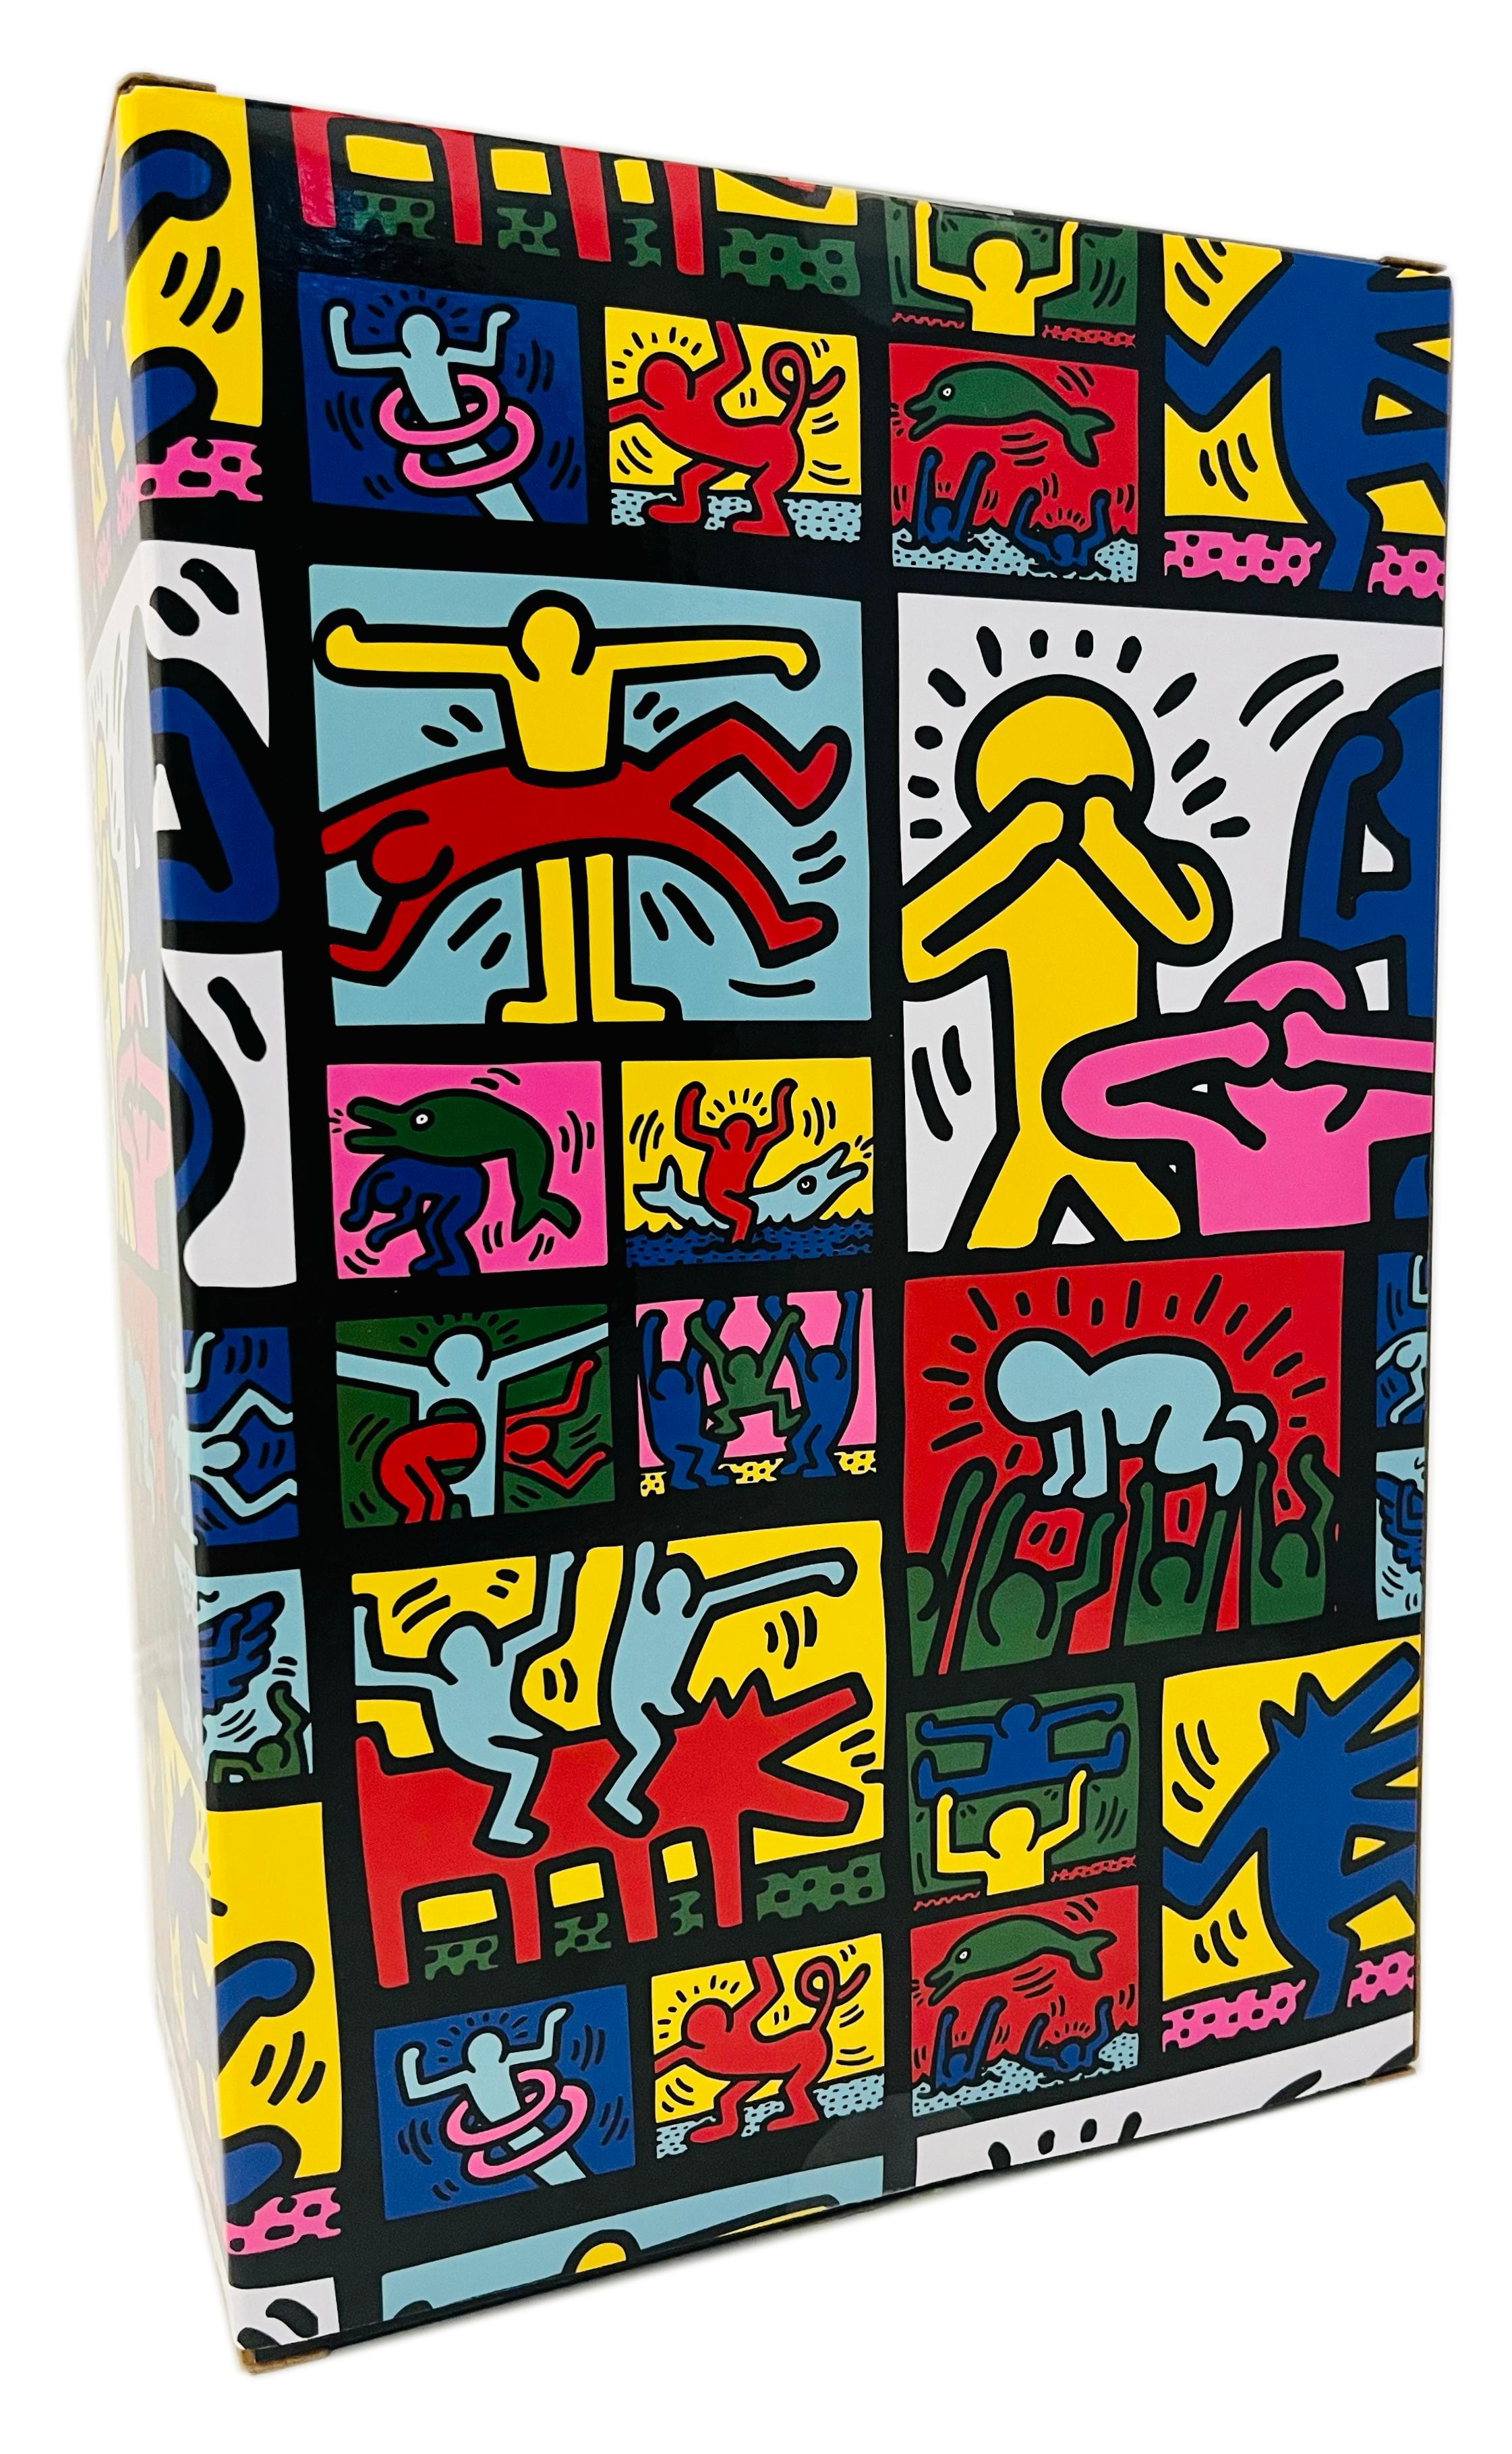 Keith Haring Bearbrick 400%  (Keith Haring BE@RBRICK)  For Sale 2